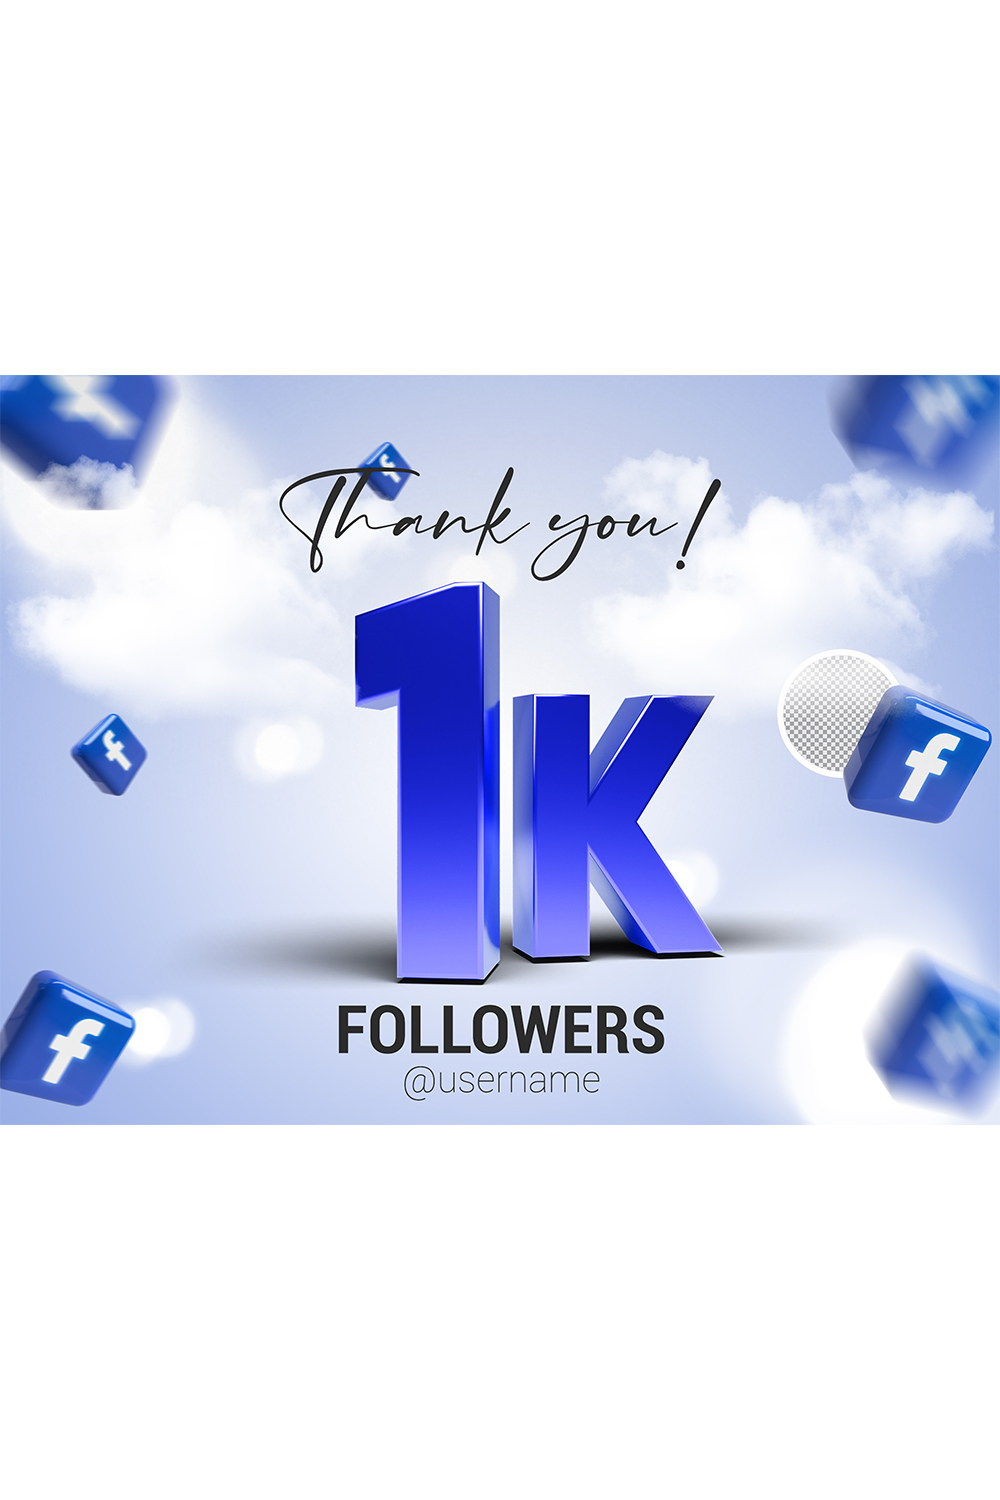 1k or 1000 followers thank you colorful Royalty Free Vector